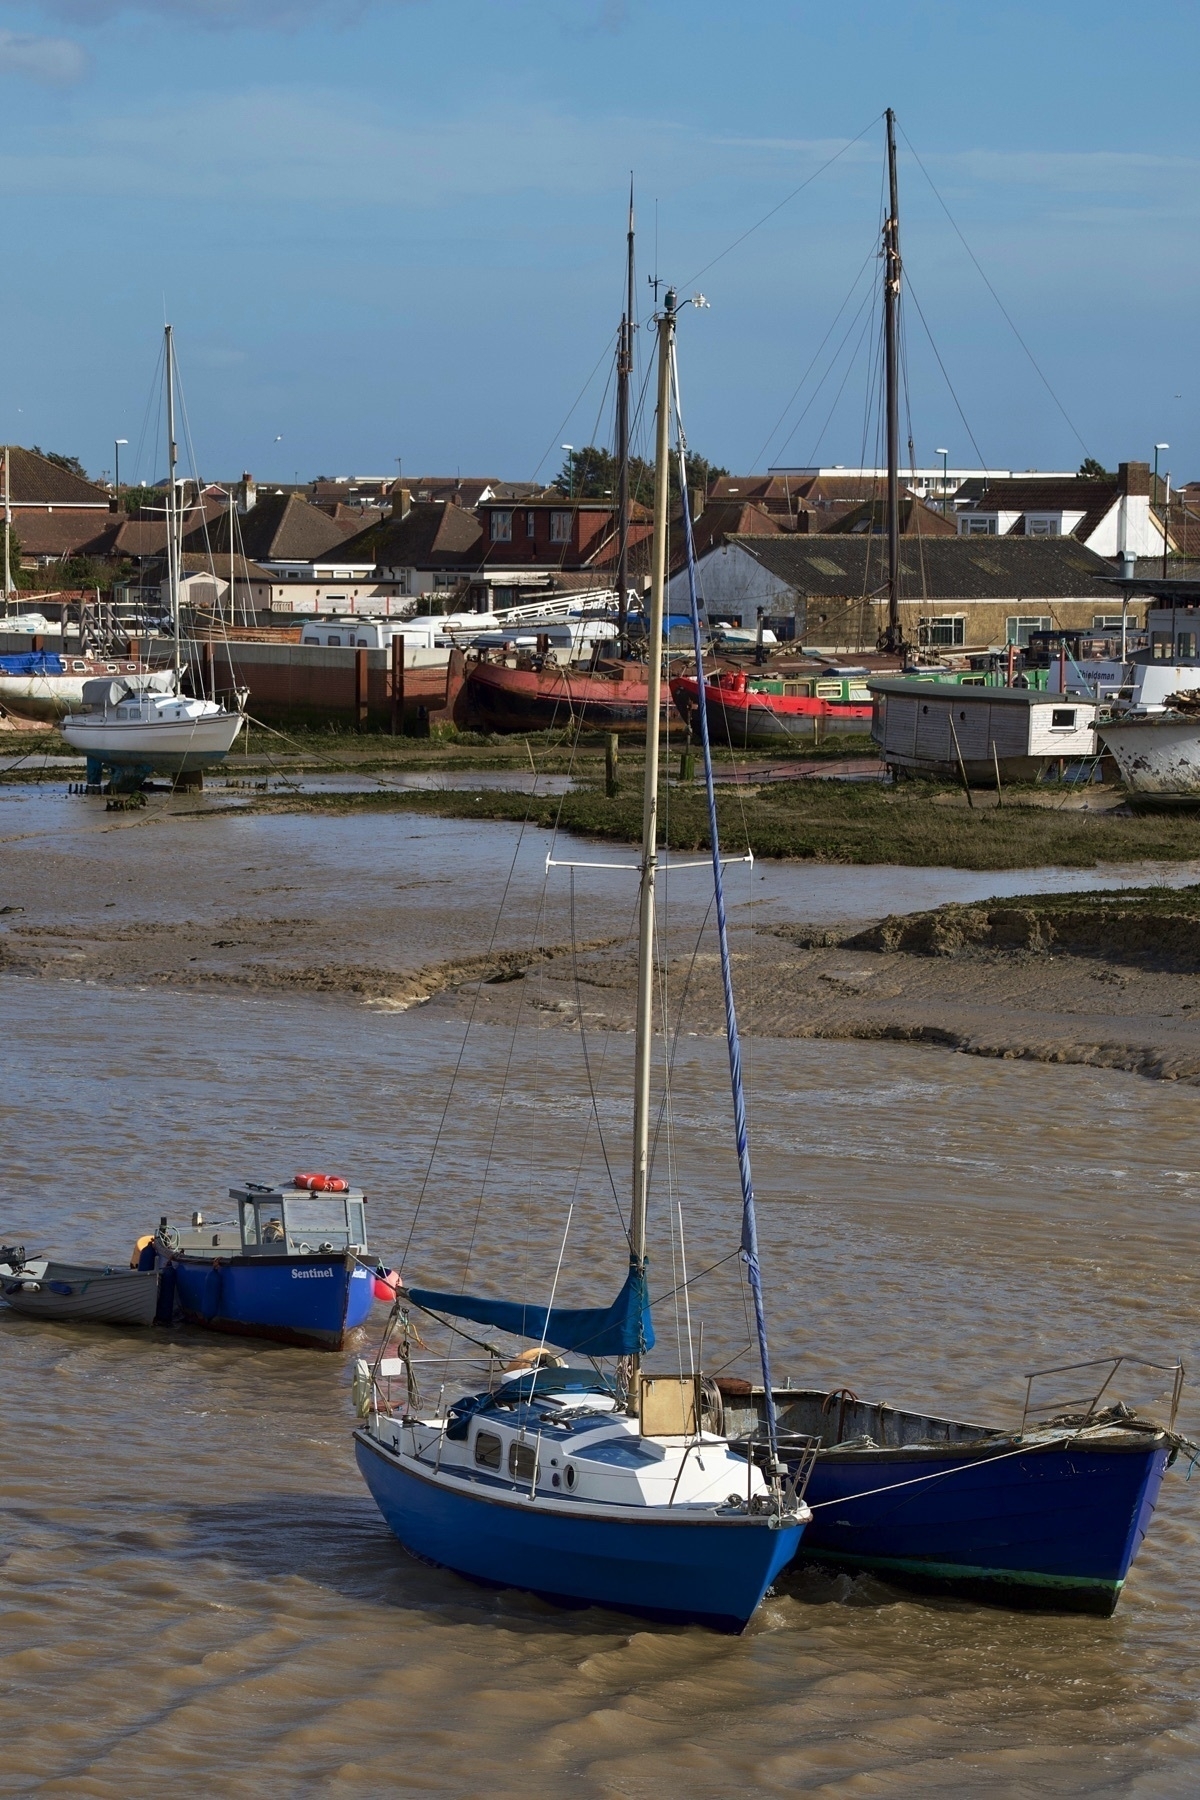 Boats moored in the river Adur. 